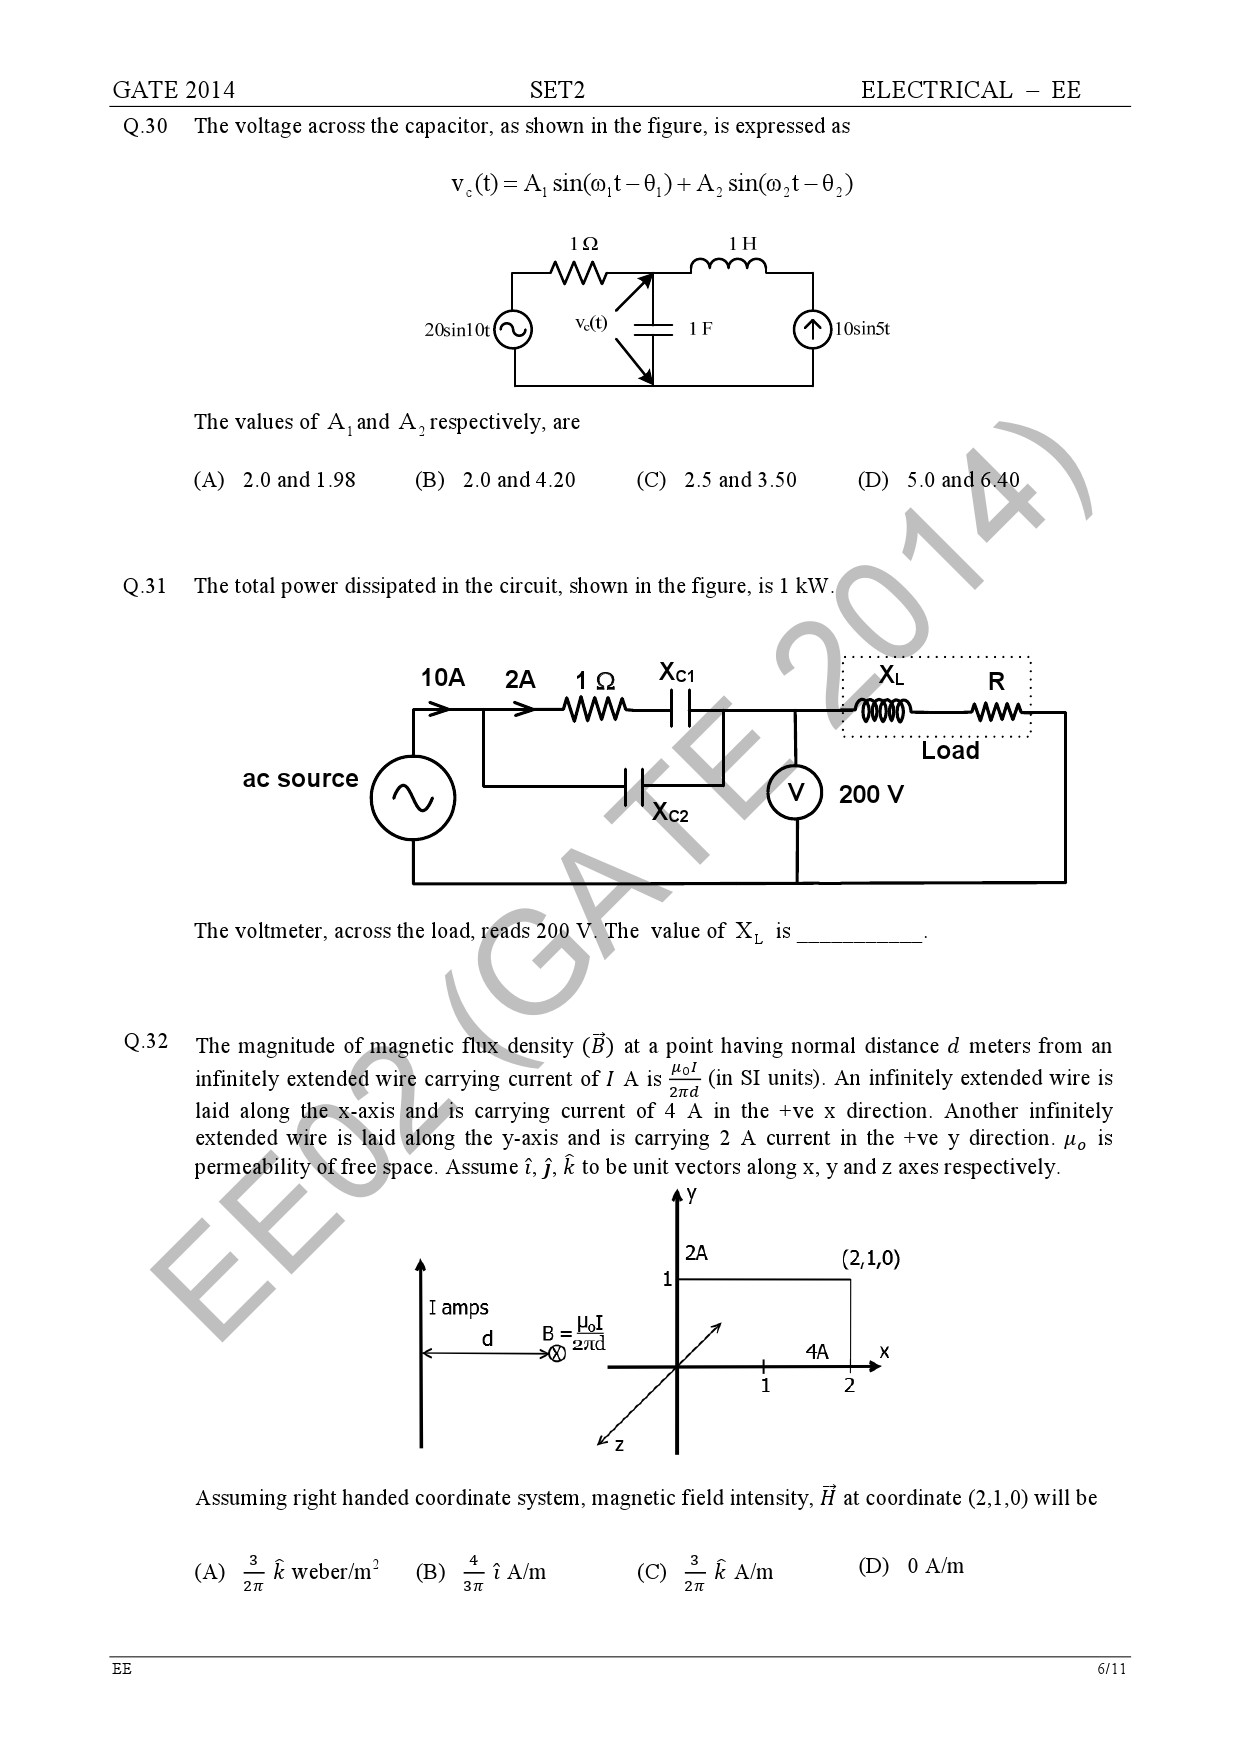 GATE Exam Question Paper 2014 Electrical Engineering Set 2 12